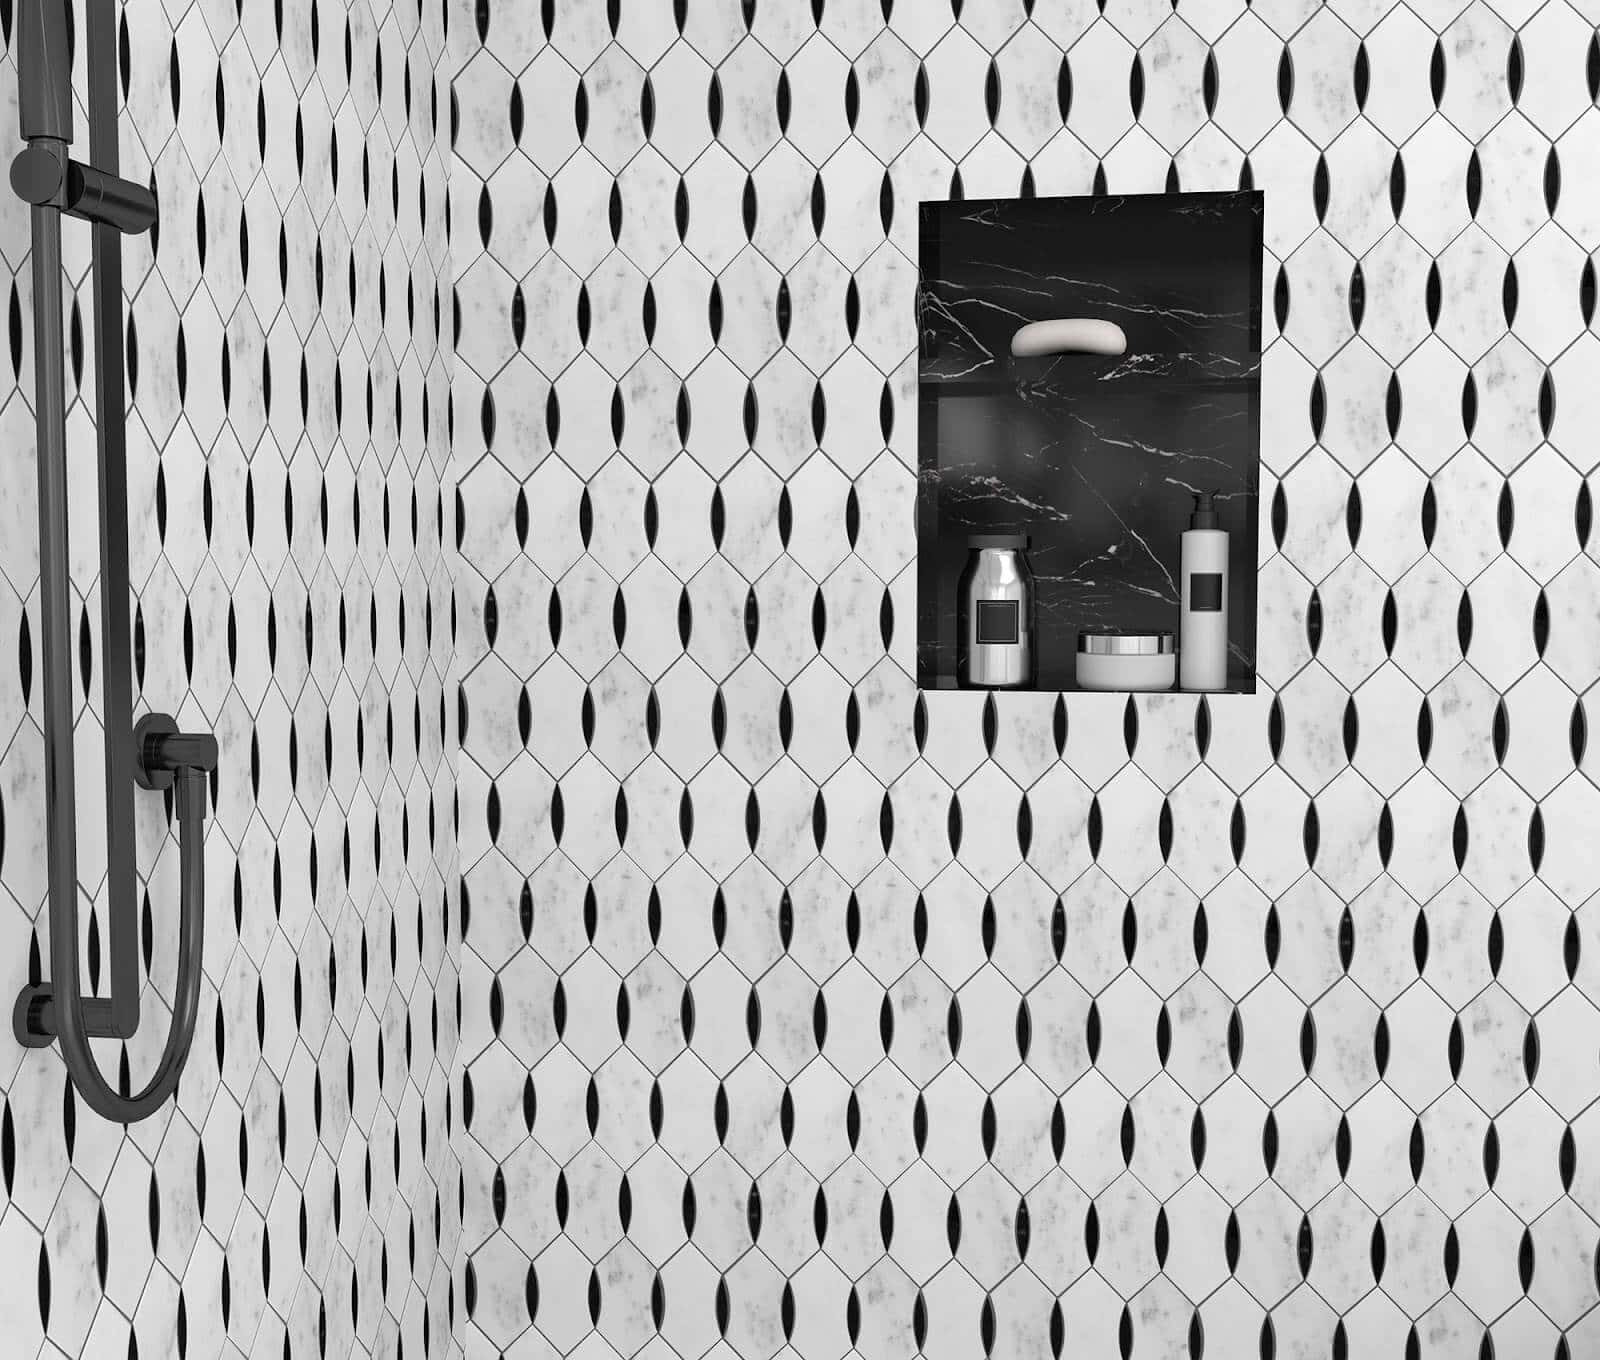 Vertical patterned black and white mosaic shower tiles